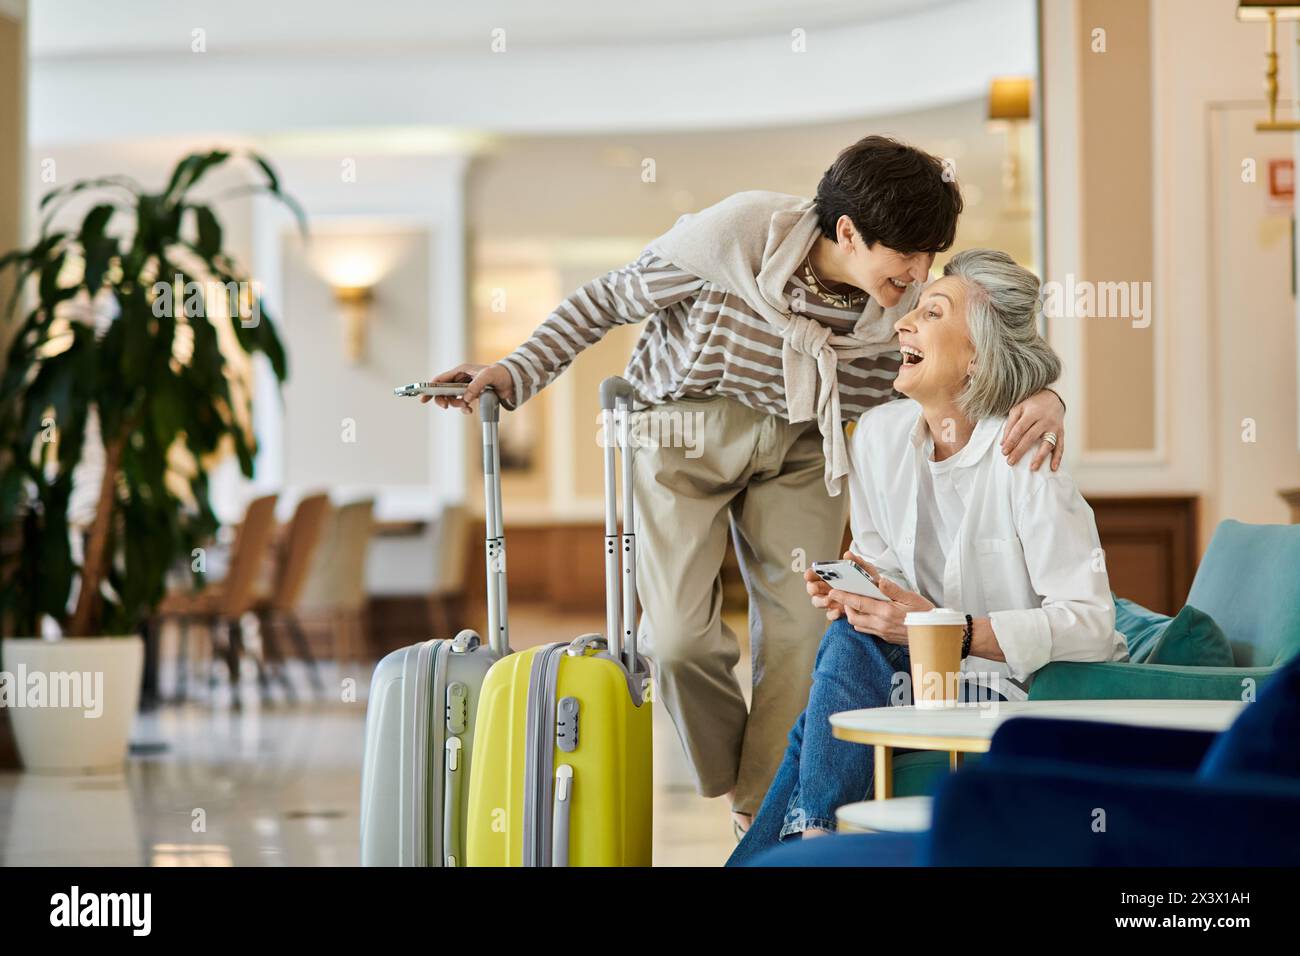 Senior lesbian couple with a suitcase in a hotel hallway. Stock Photo